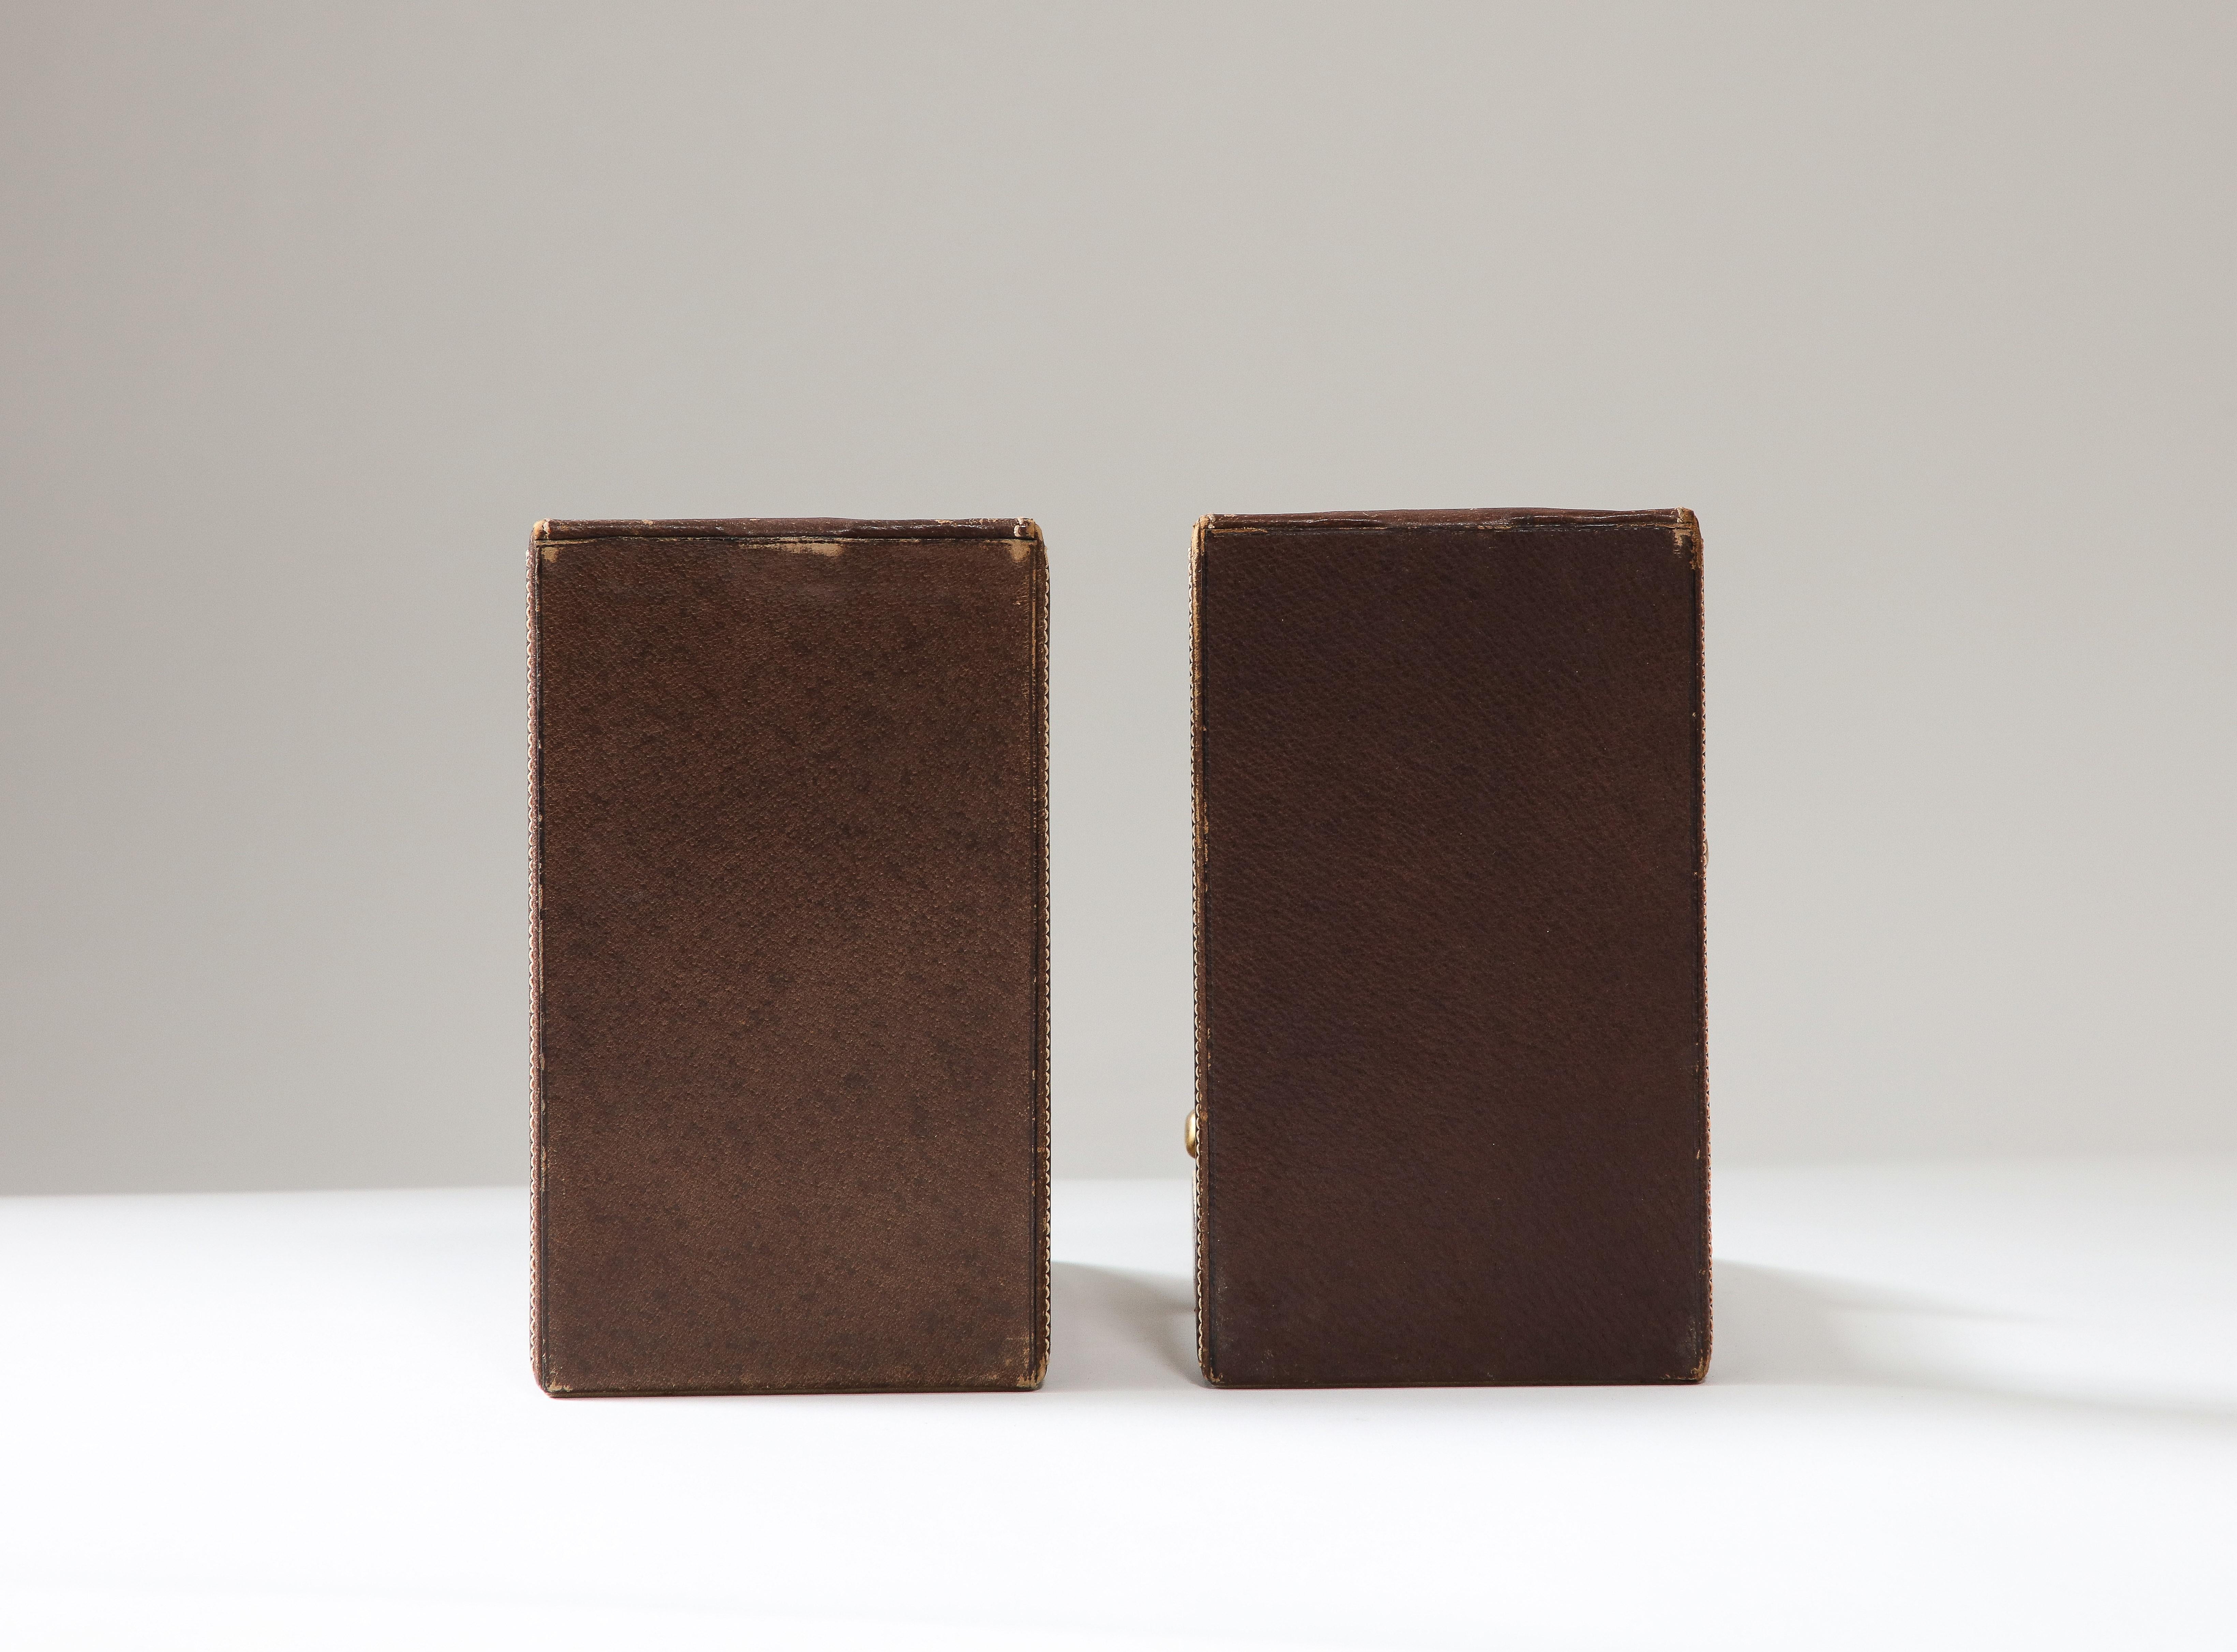 Pair of Leather and Brass Bookends, Gucci, Italy, c. 1970 In Good Condition For Sale In New York City, NY